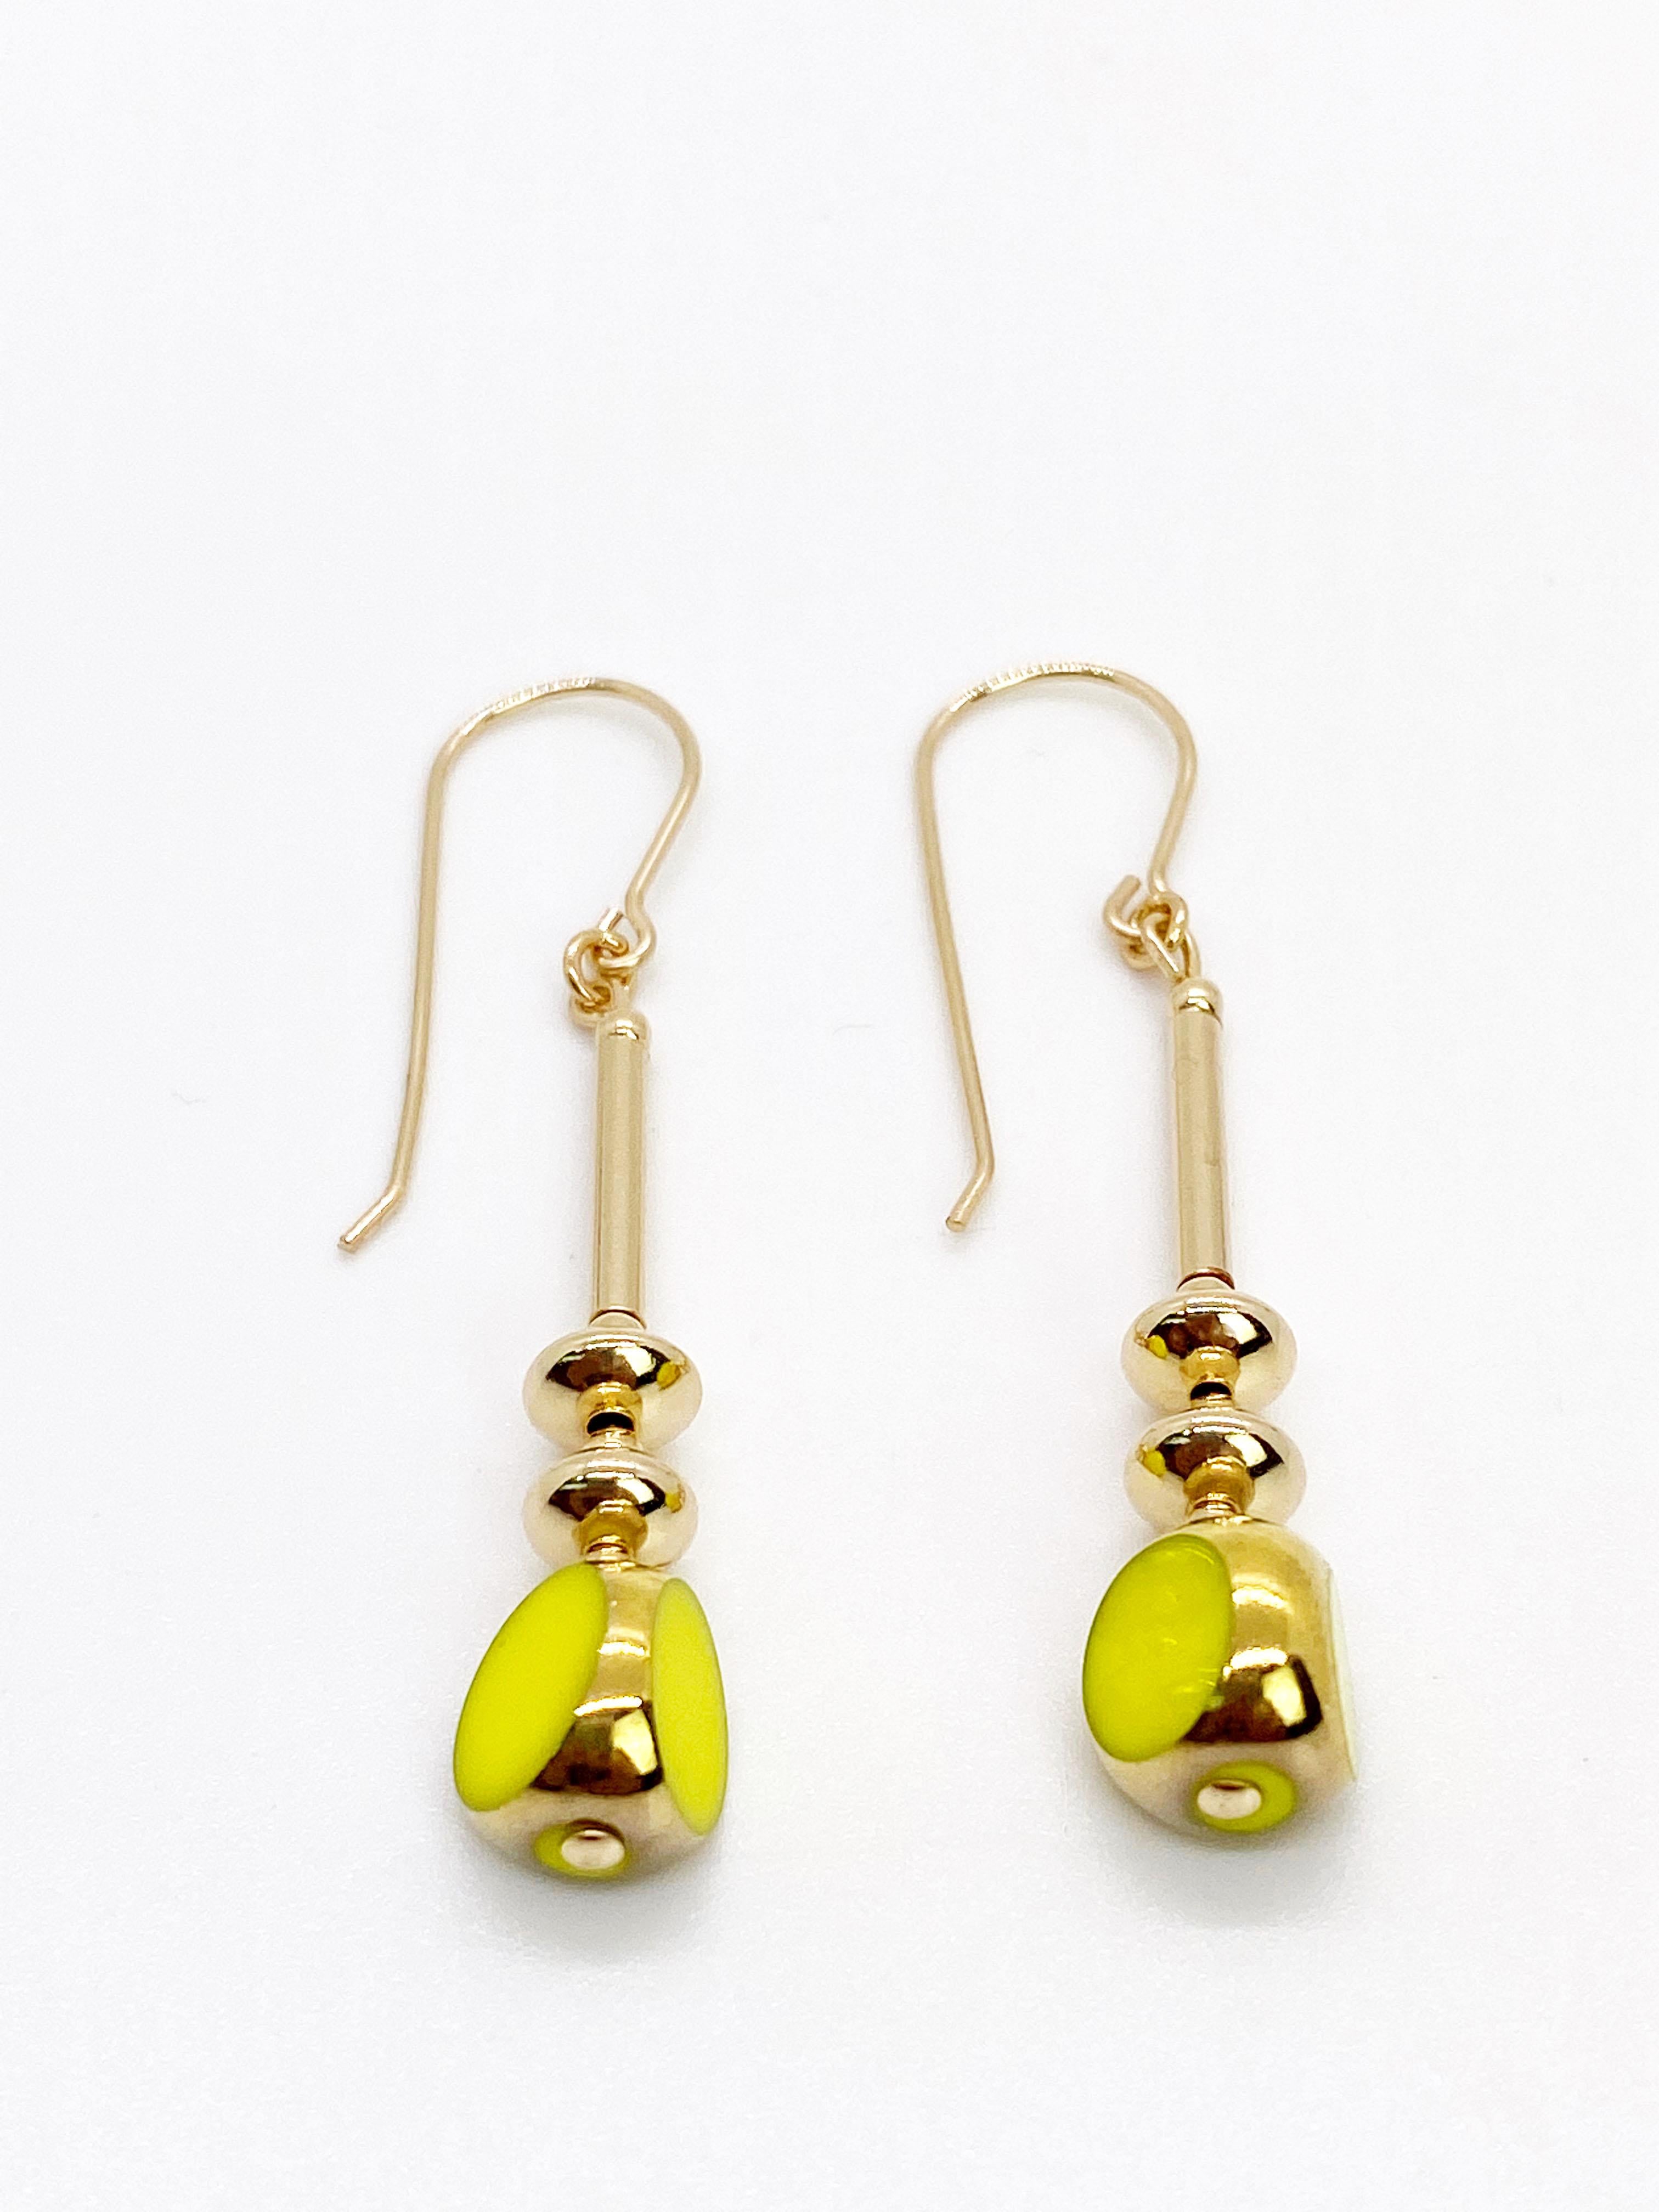 The earrings each consist of 1 bright and beautiful opaque Chartreuse window glass beads. The German vintage glass beads that are framed with 24K gold along with gold filled metal beads and wires.

The vintage German glass beads were hand pressed